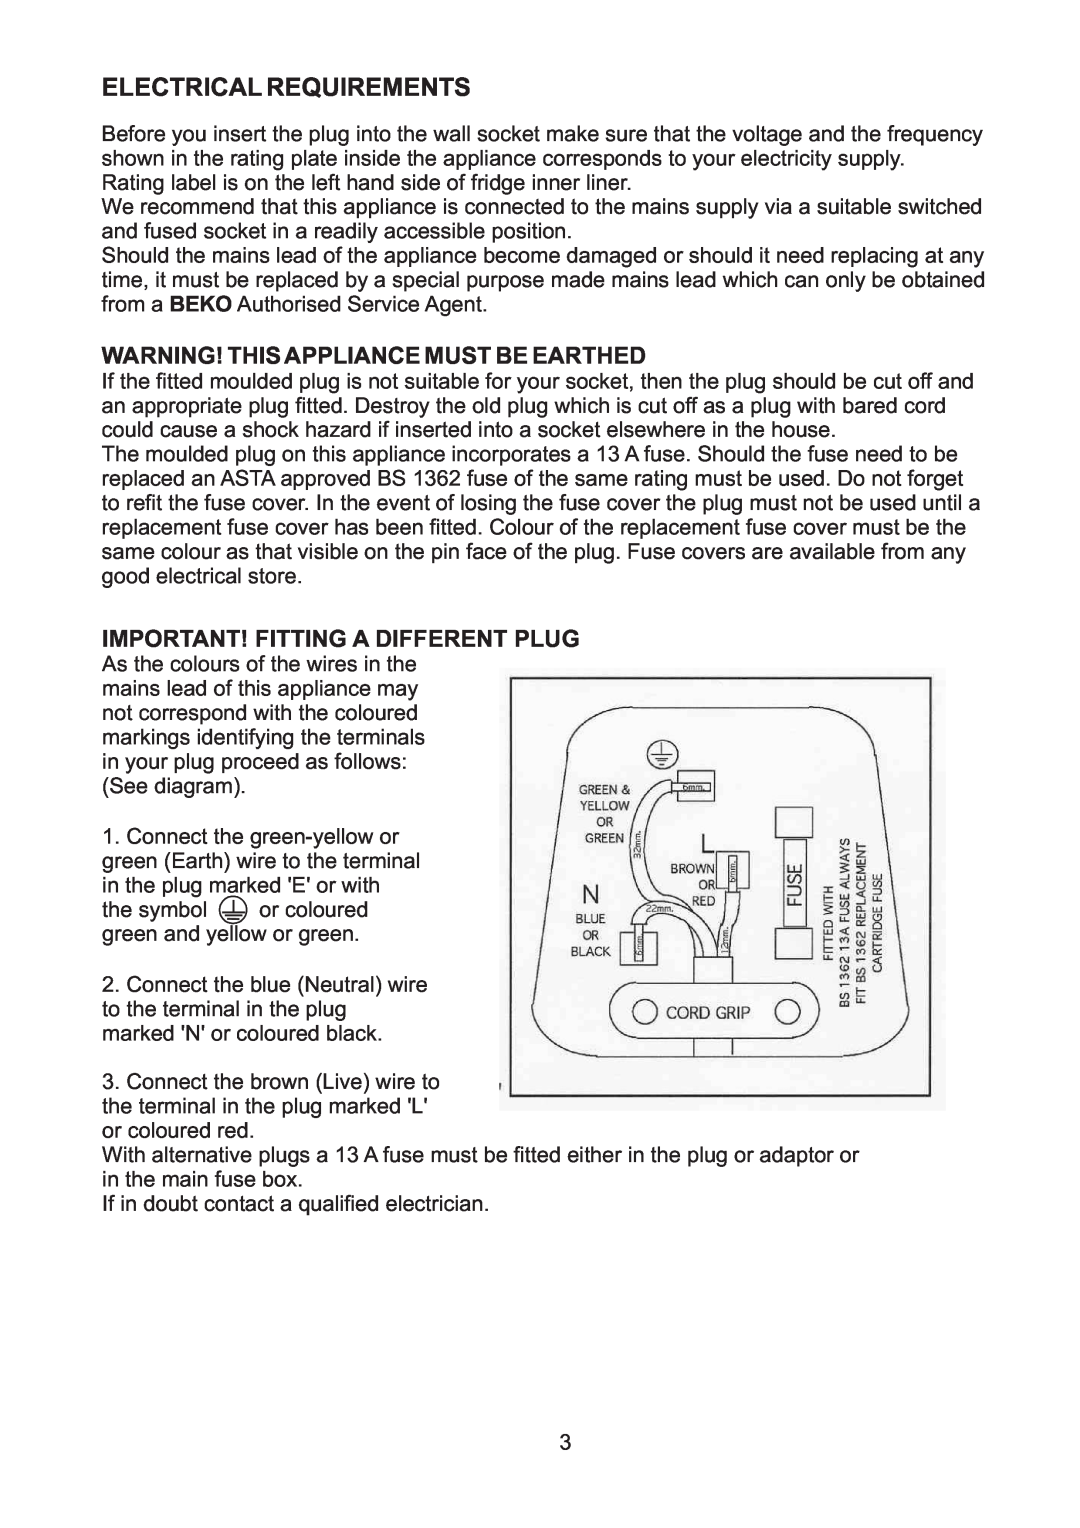 Beko CDA 664 F manual Electrical Requirements, Warning! This Appliance Must Be Earthed, Important!Fitting A Differentplug 